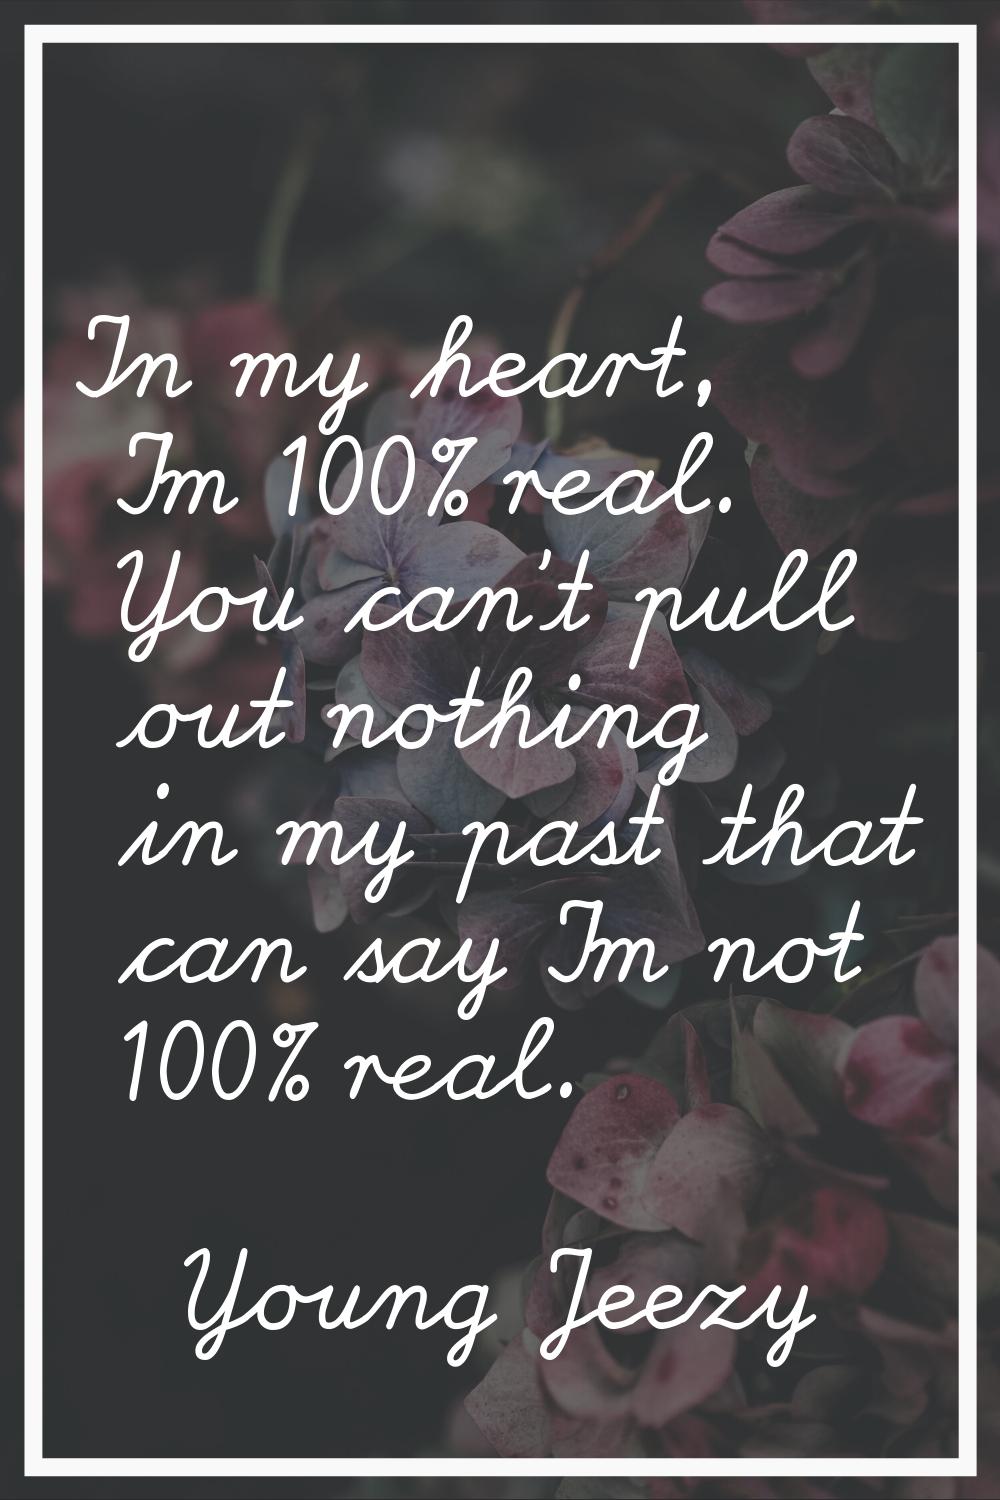 In my heart, I'm 100% real. You can't pull out nothing in my past that can say I'm not 100% real.